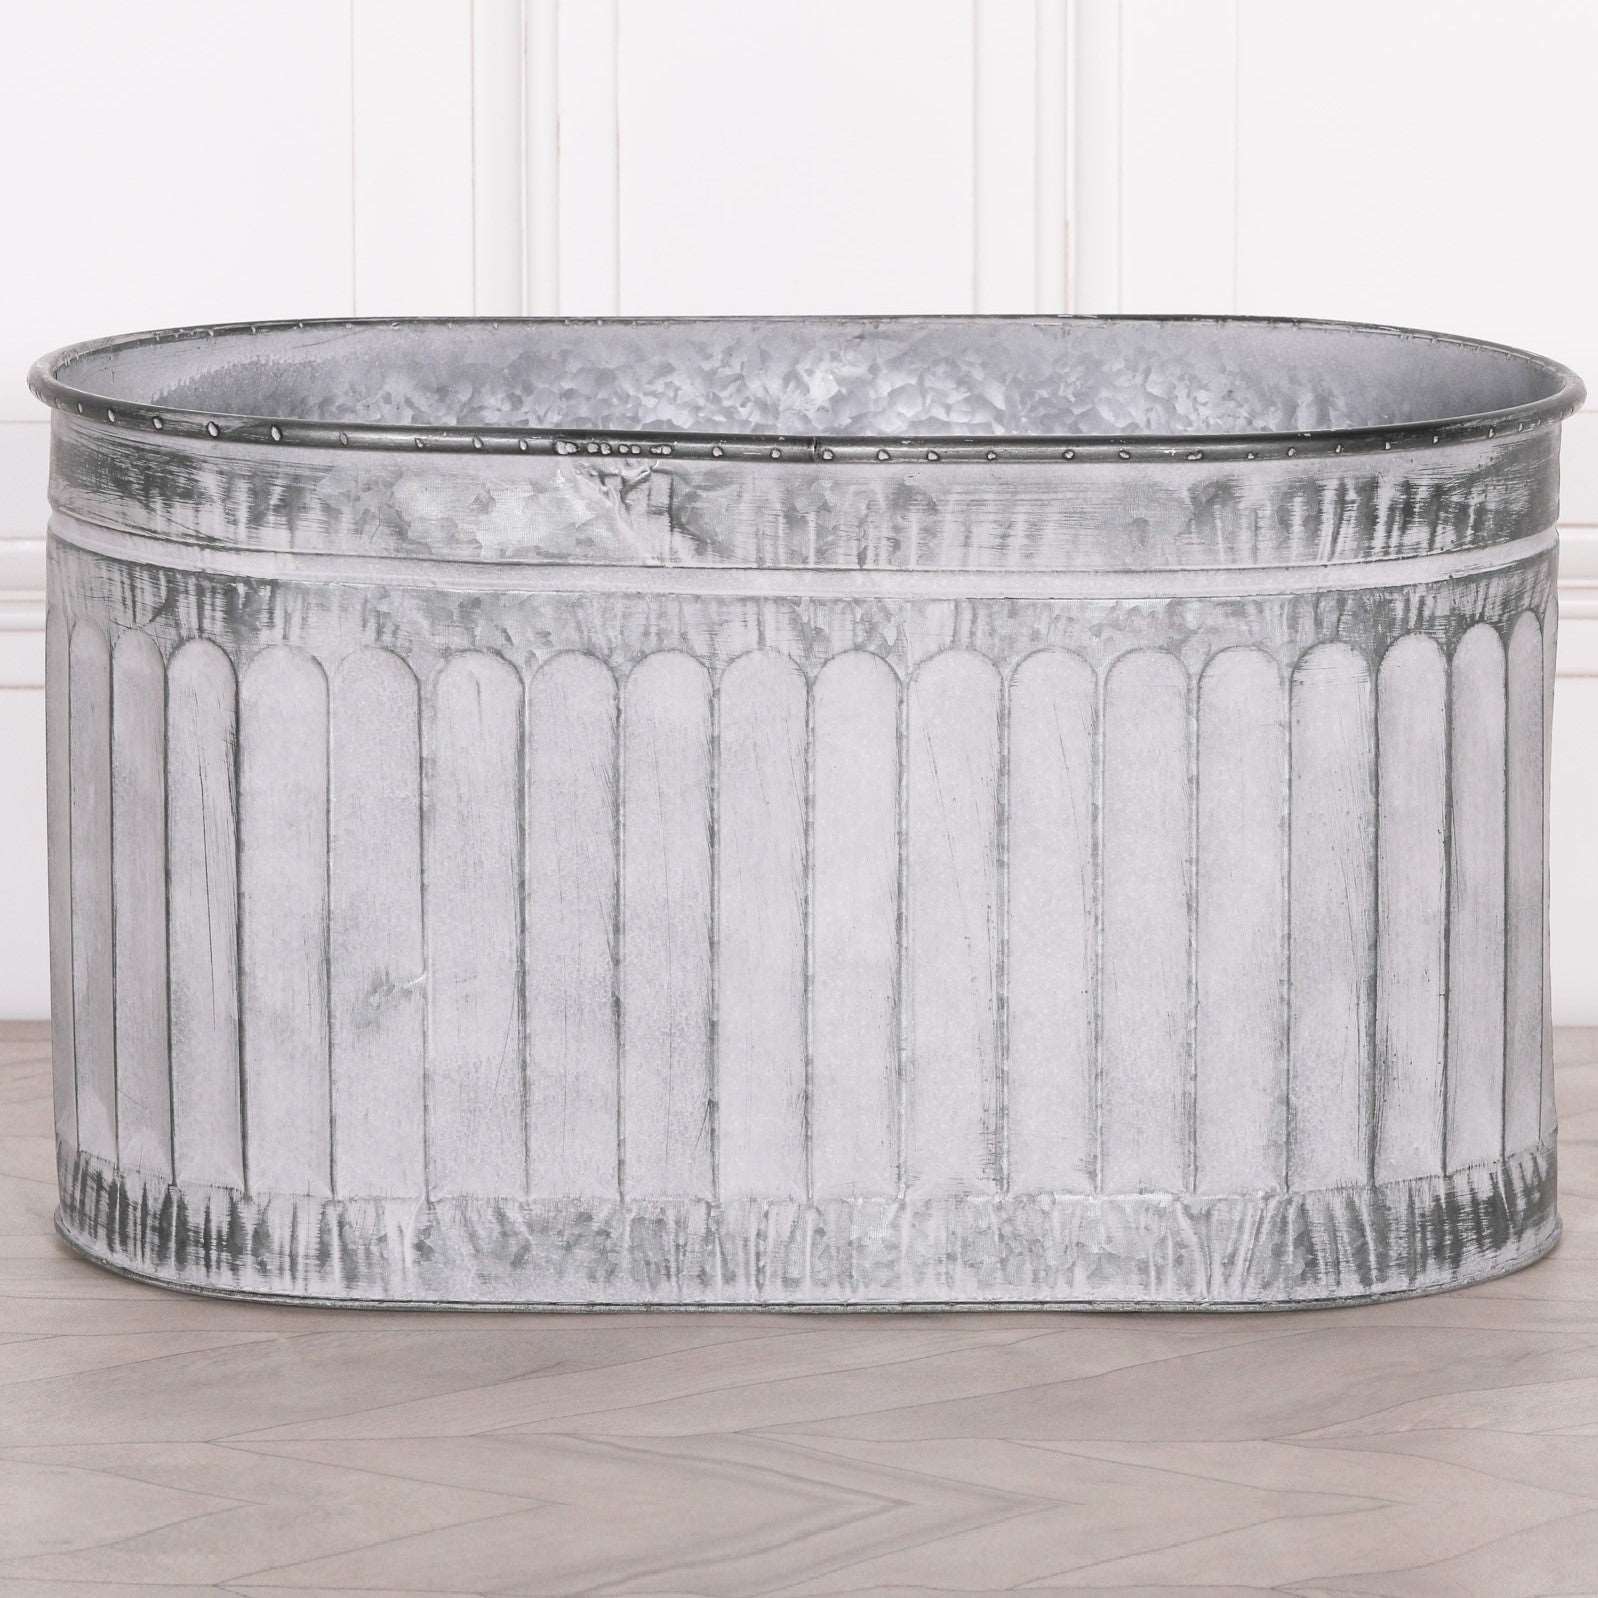 Arched Pattern Metal Planter - Large